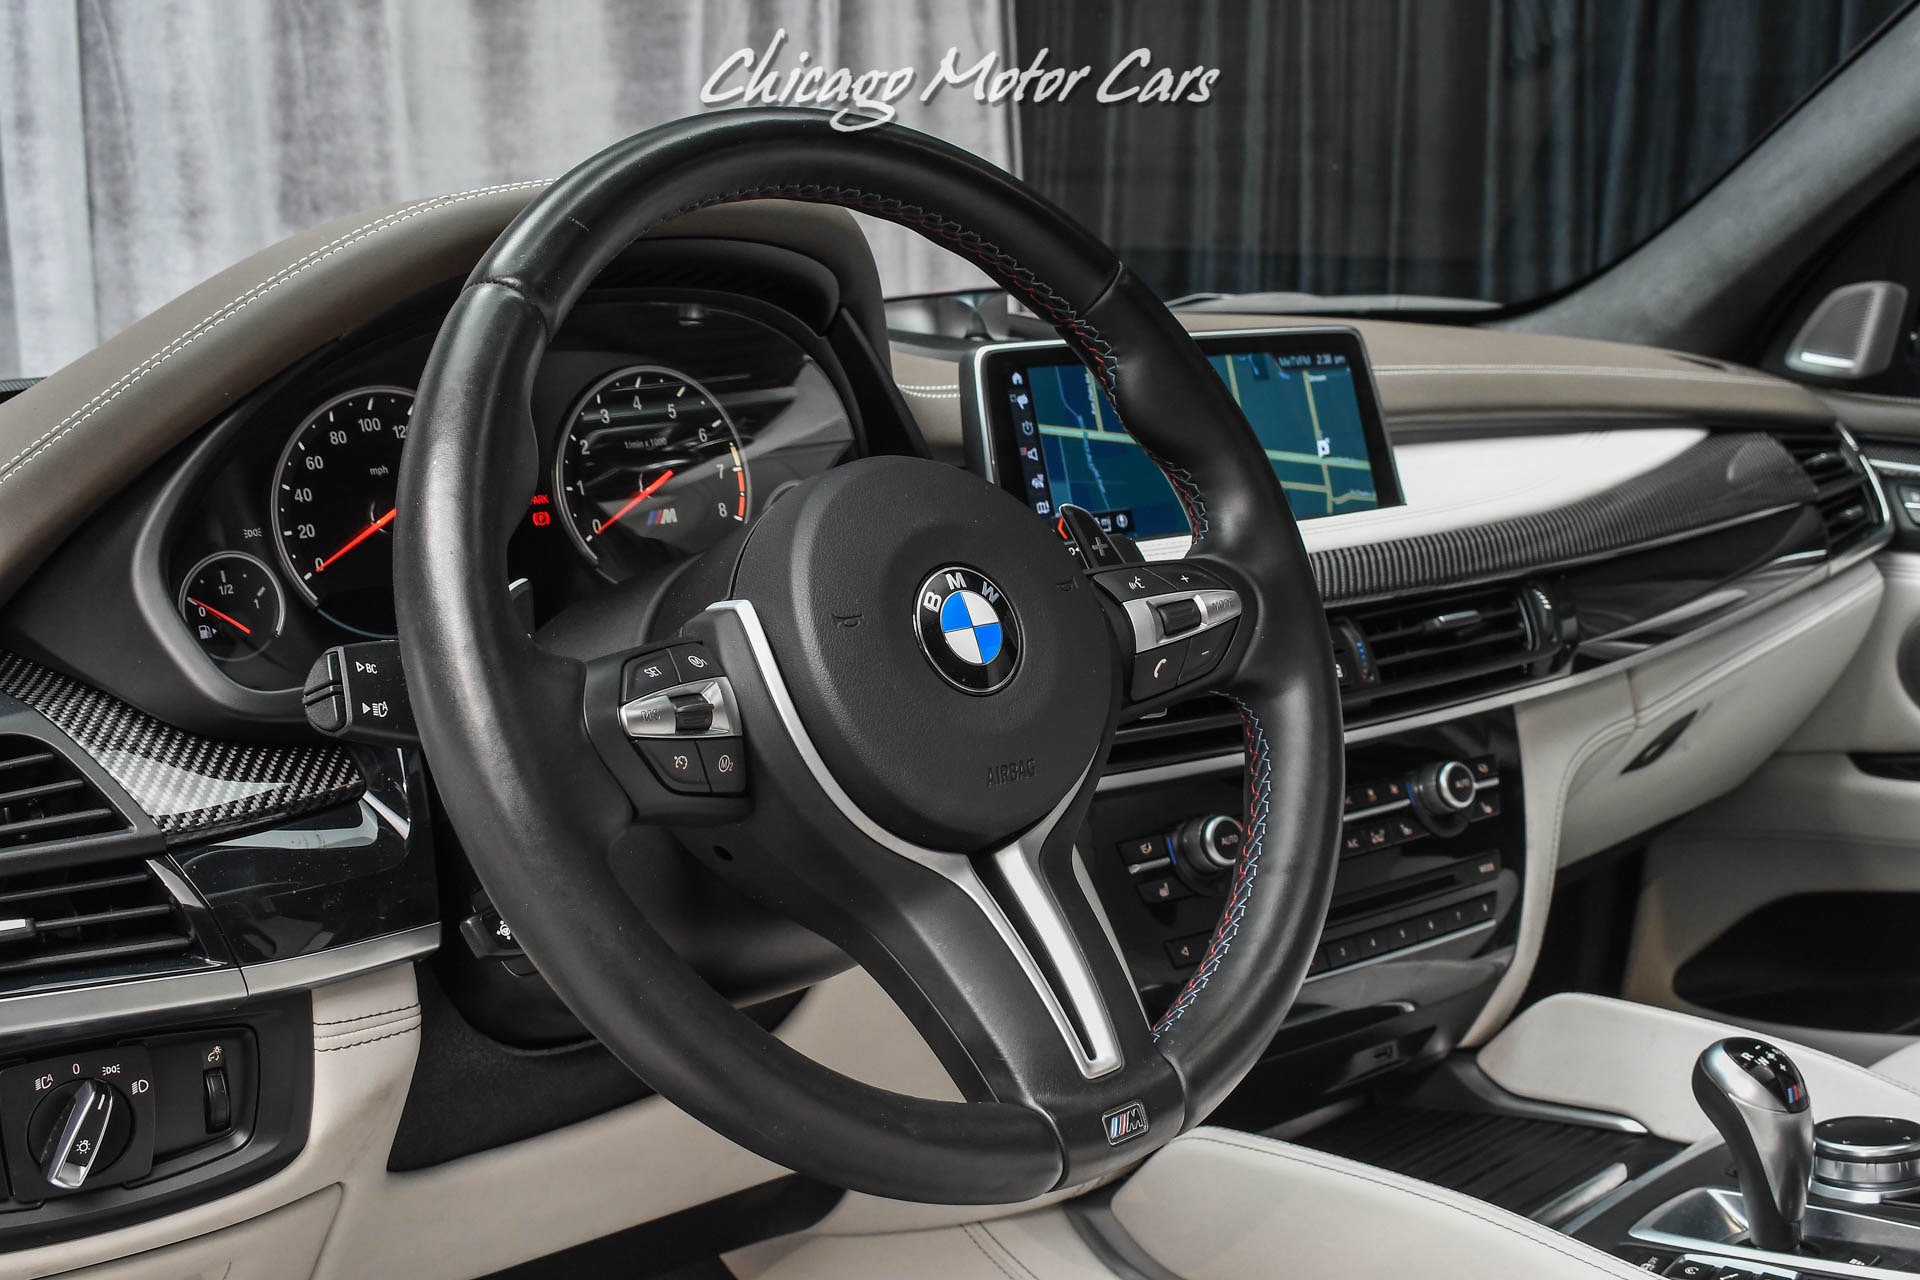 Recall Fruit vegetables Reorganize Used 2018 BMW X5 M SUV MSRP $114,695+ Executive Package! Bang & Olufsen  Sound! Apple CarPlay! For Sale (Special Pricing) | Chicago Motor Cars Stock  #18492